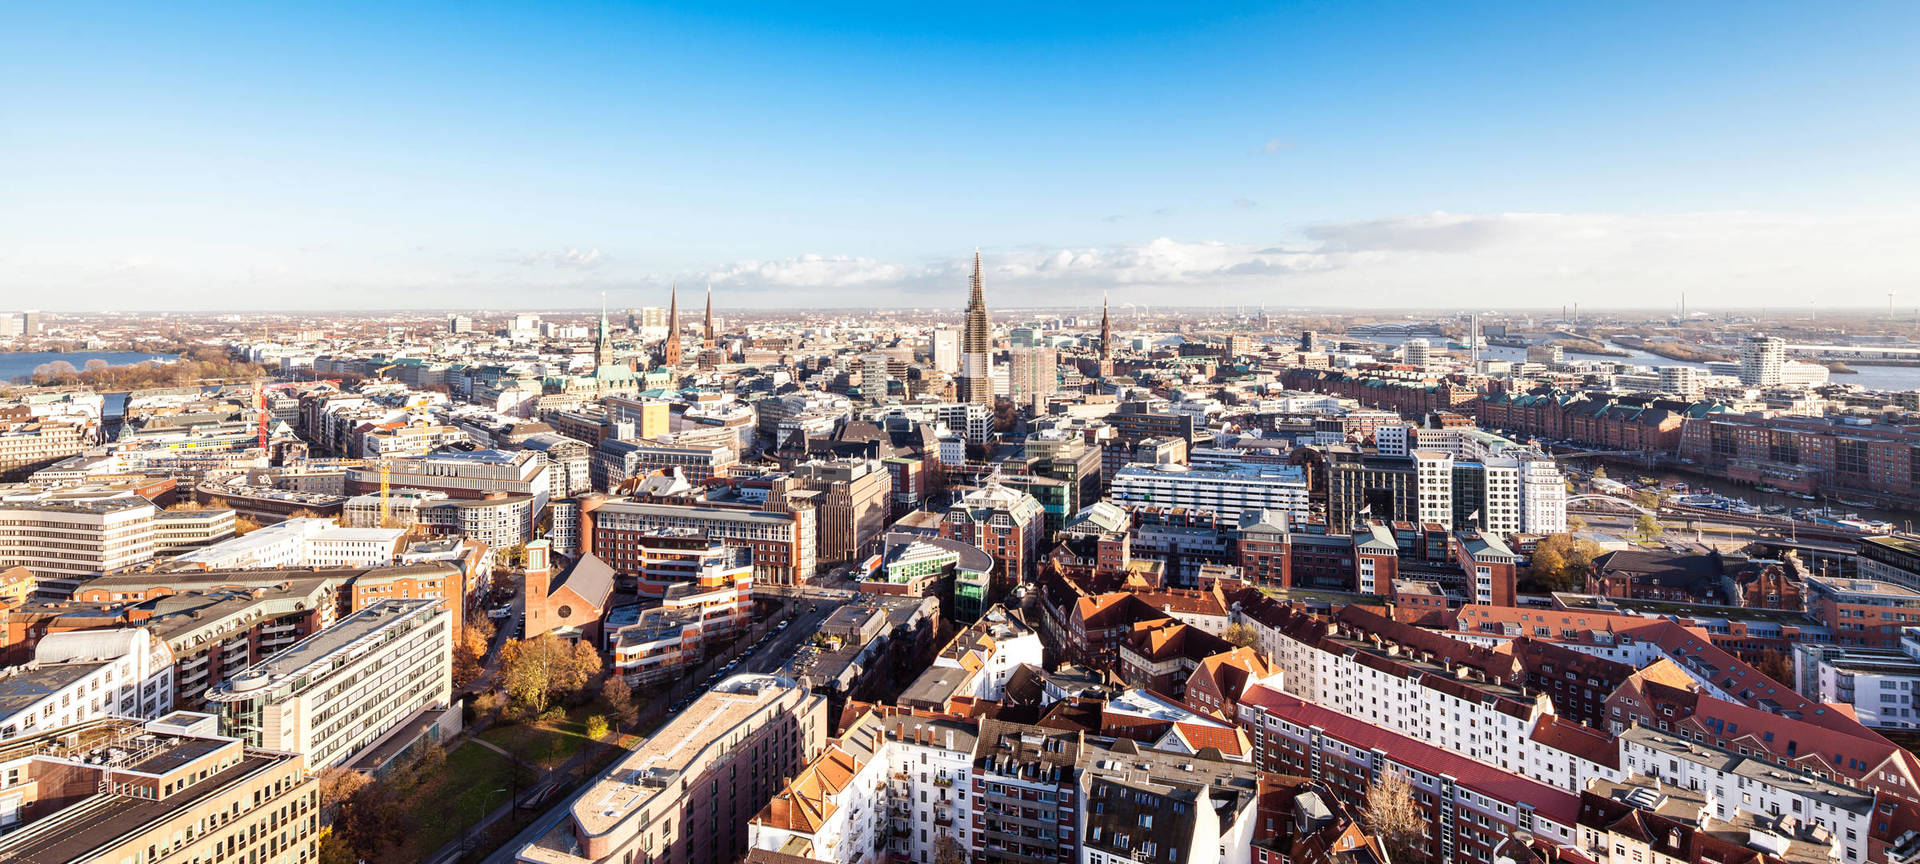 Discover Hamburg with the attractive offers of the Hyperion Hotel Hamburg - Official website